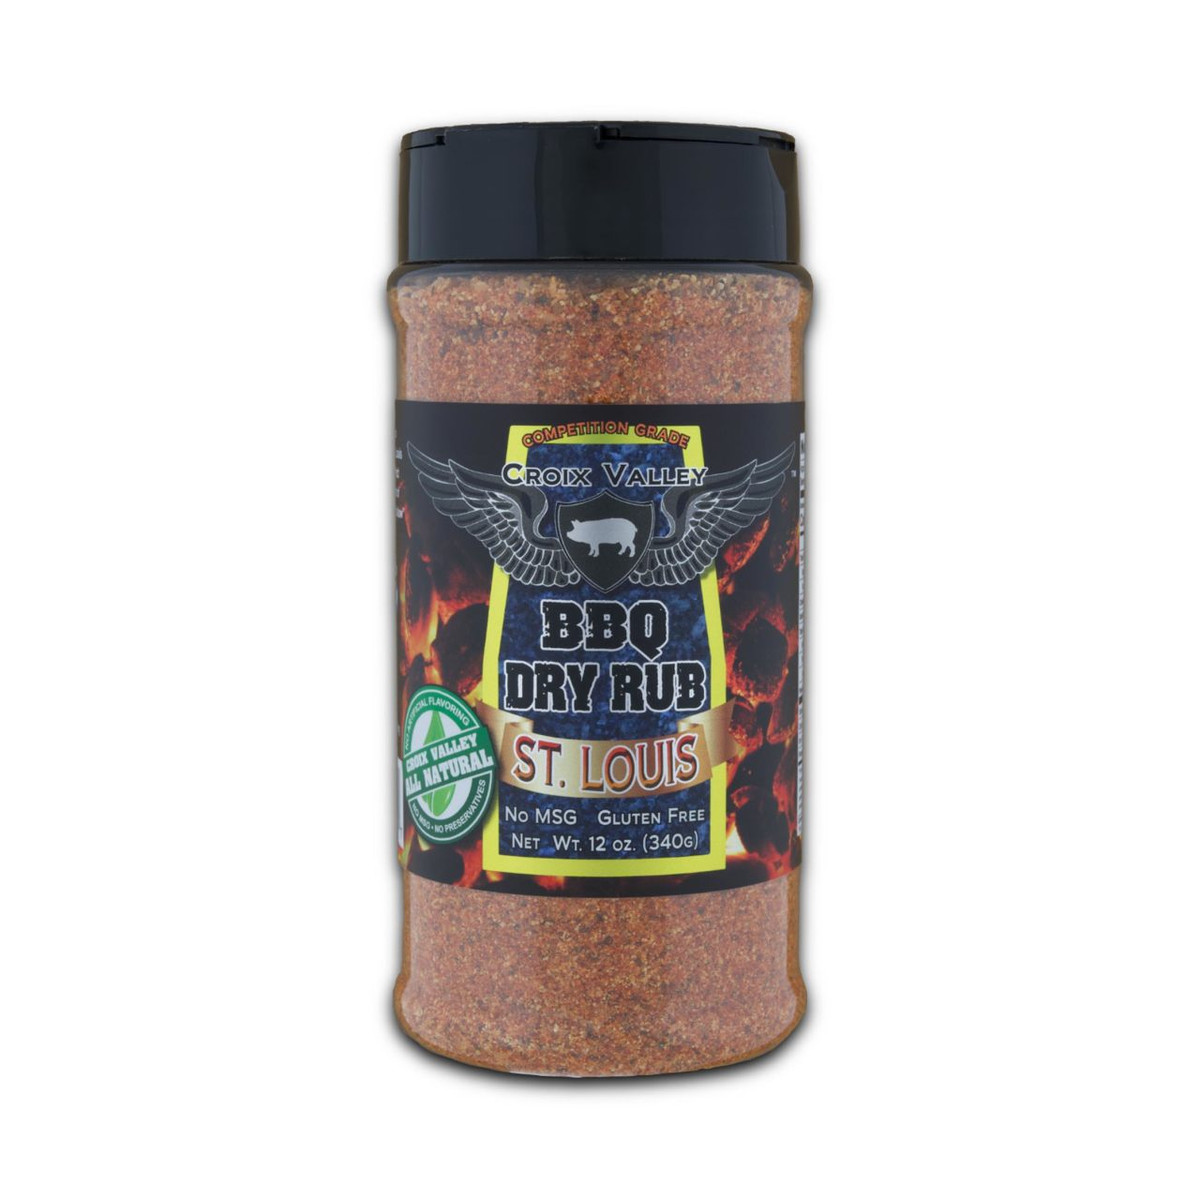 destane moore recommends rub ratings st louis pic